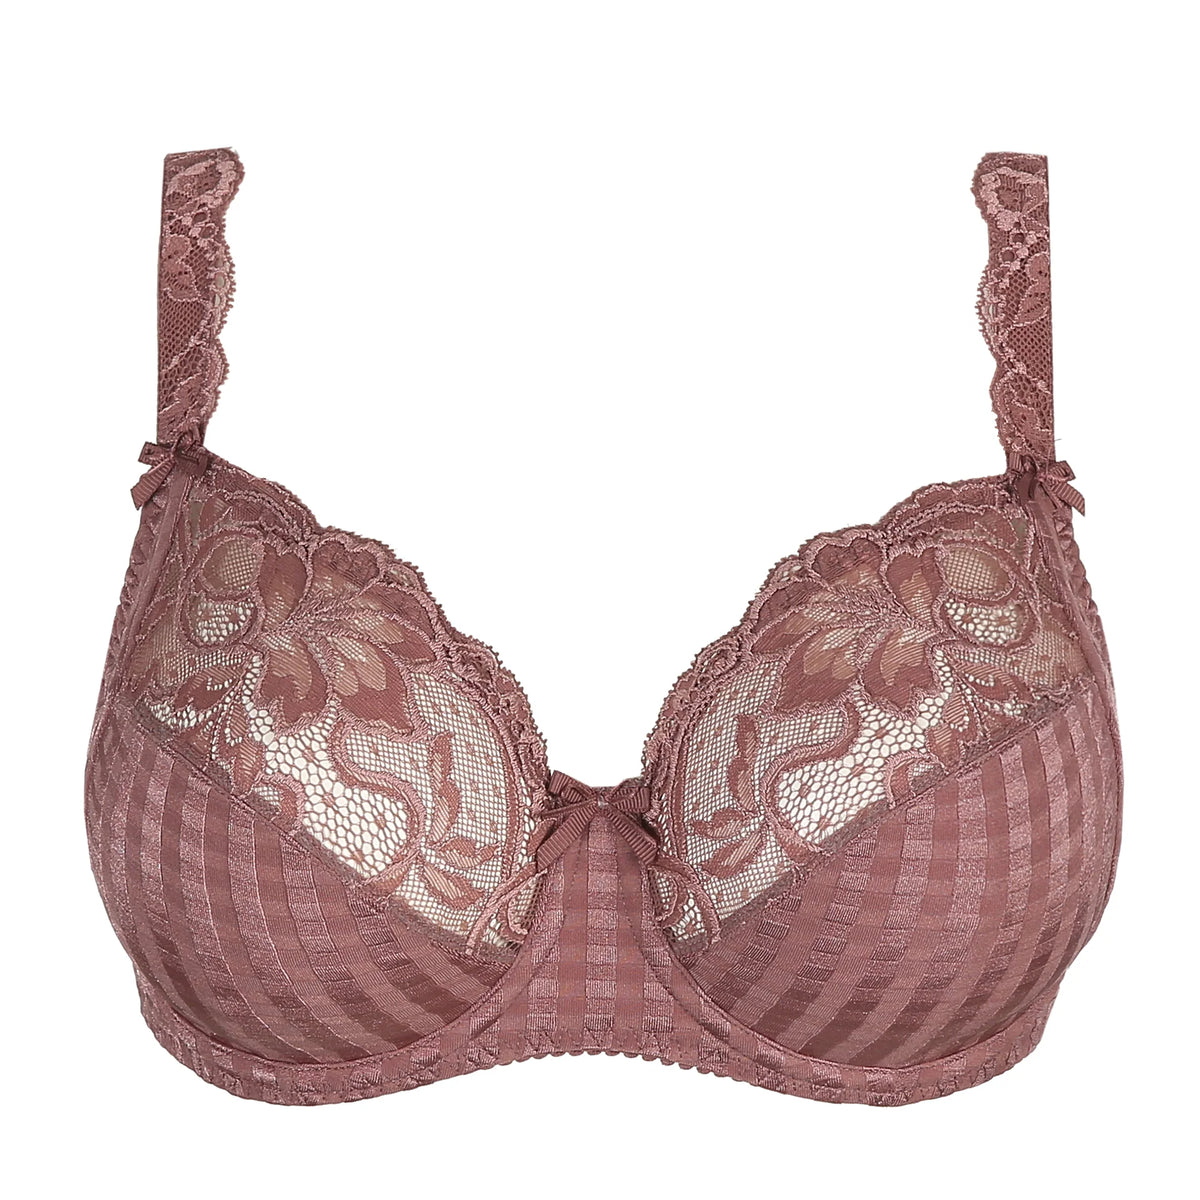 PRIMA DONNA MADISON FULL CUP -SATIN TAUPE